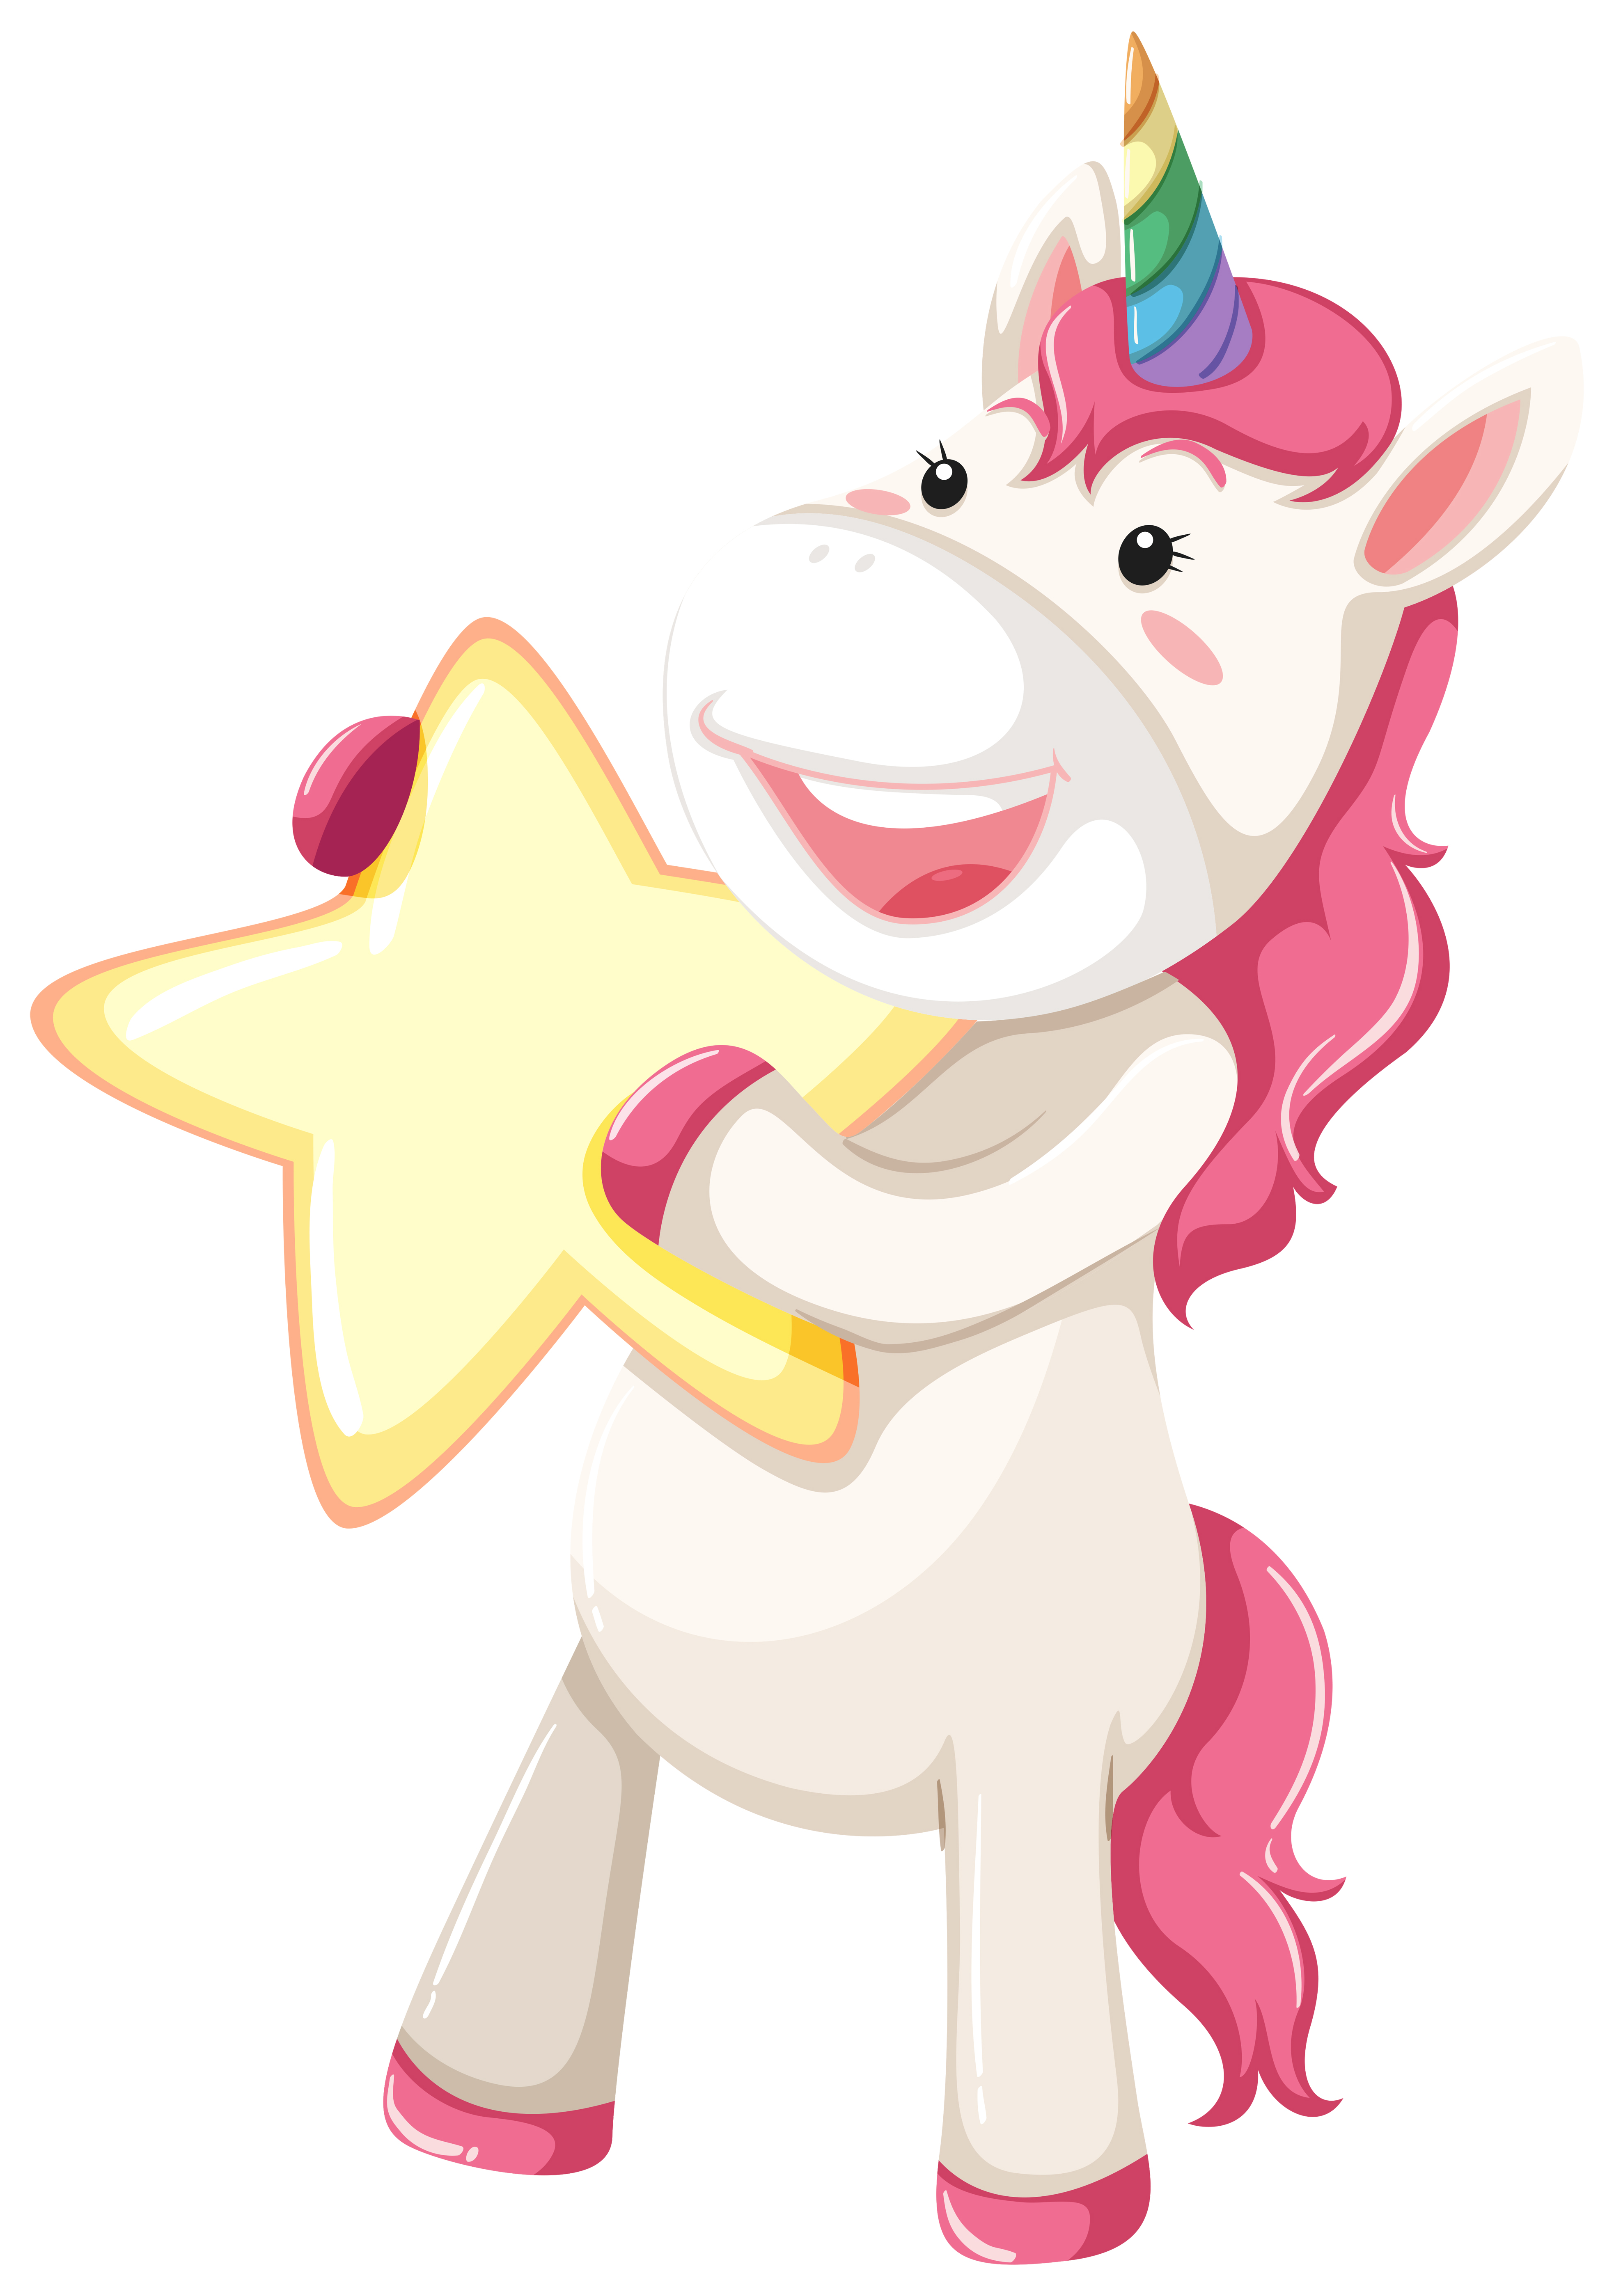 Cute pink unicorn holding star - Download Free Vectors 